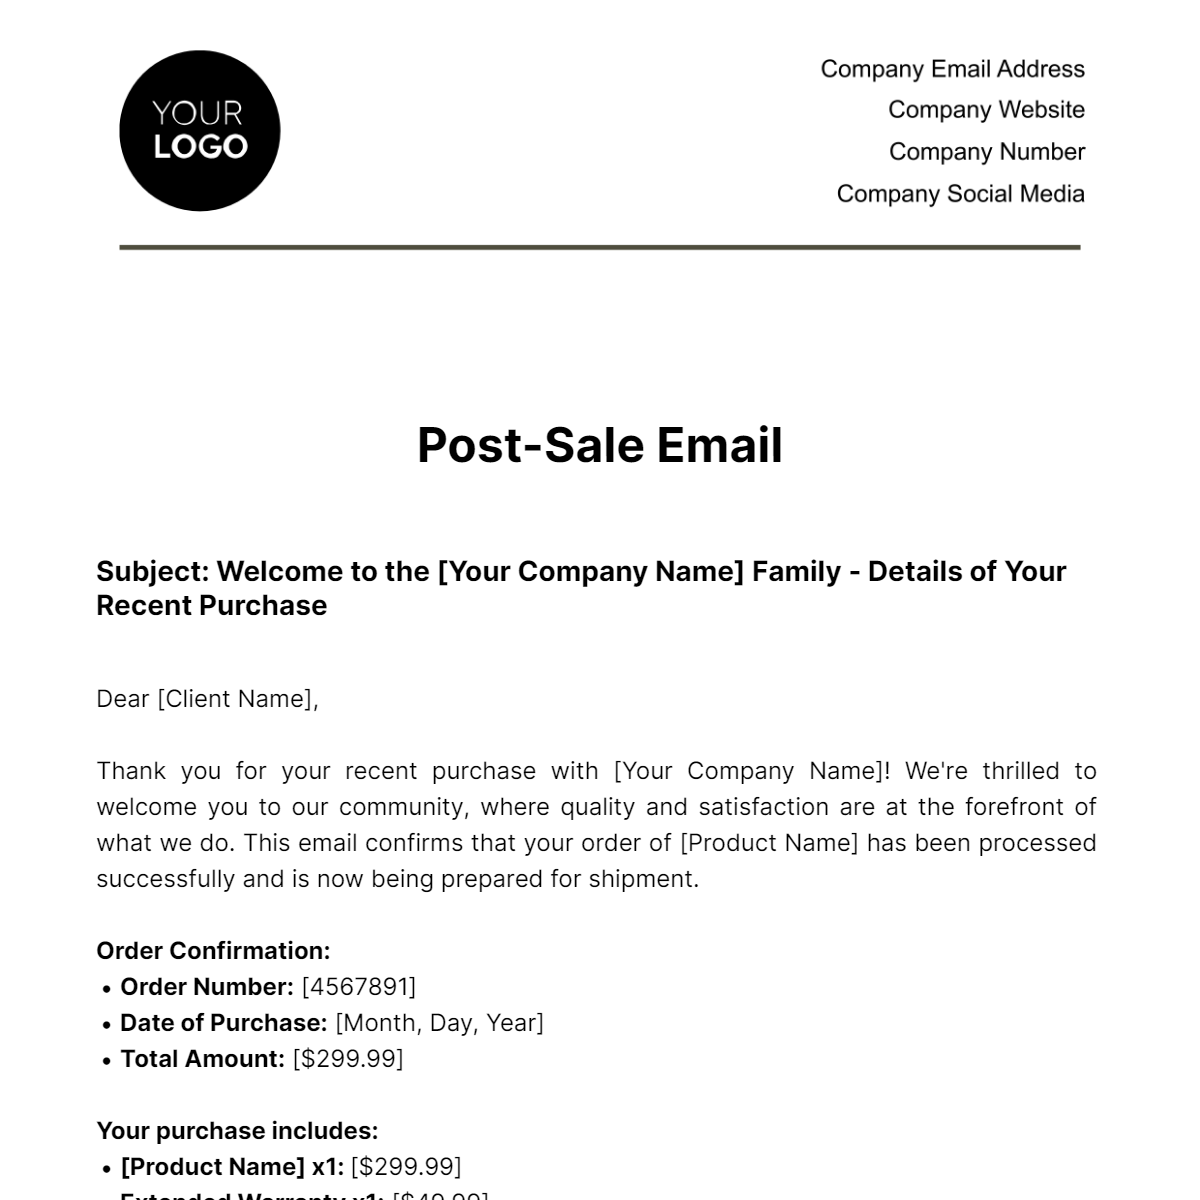 Free Post-Sale Email Template